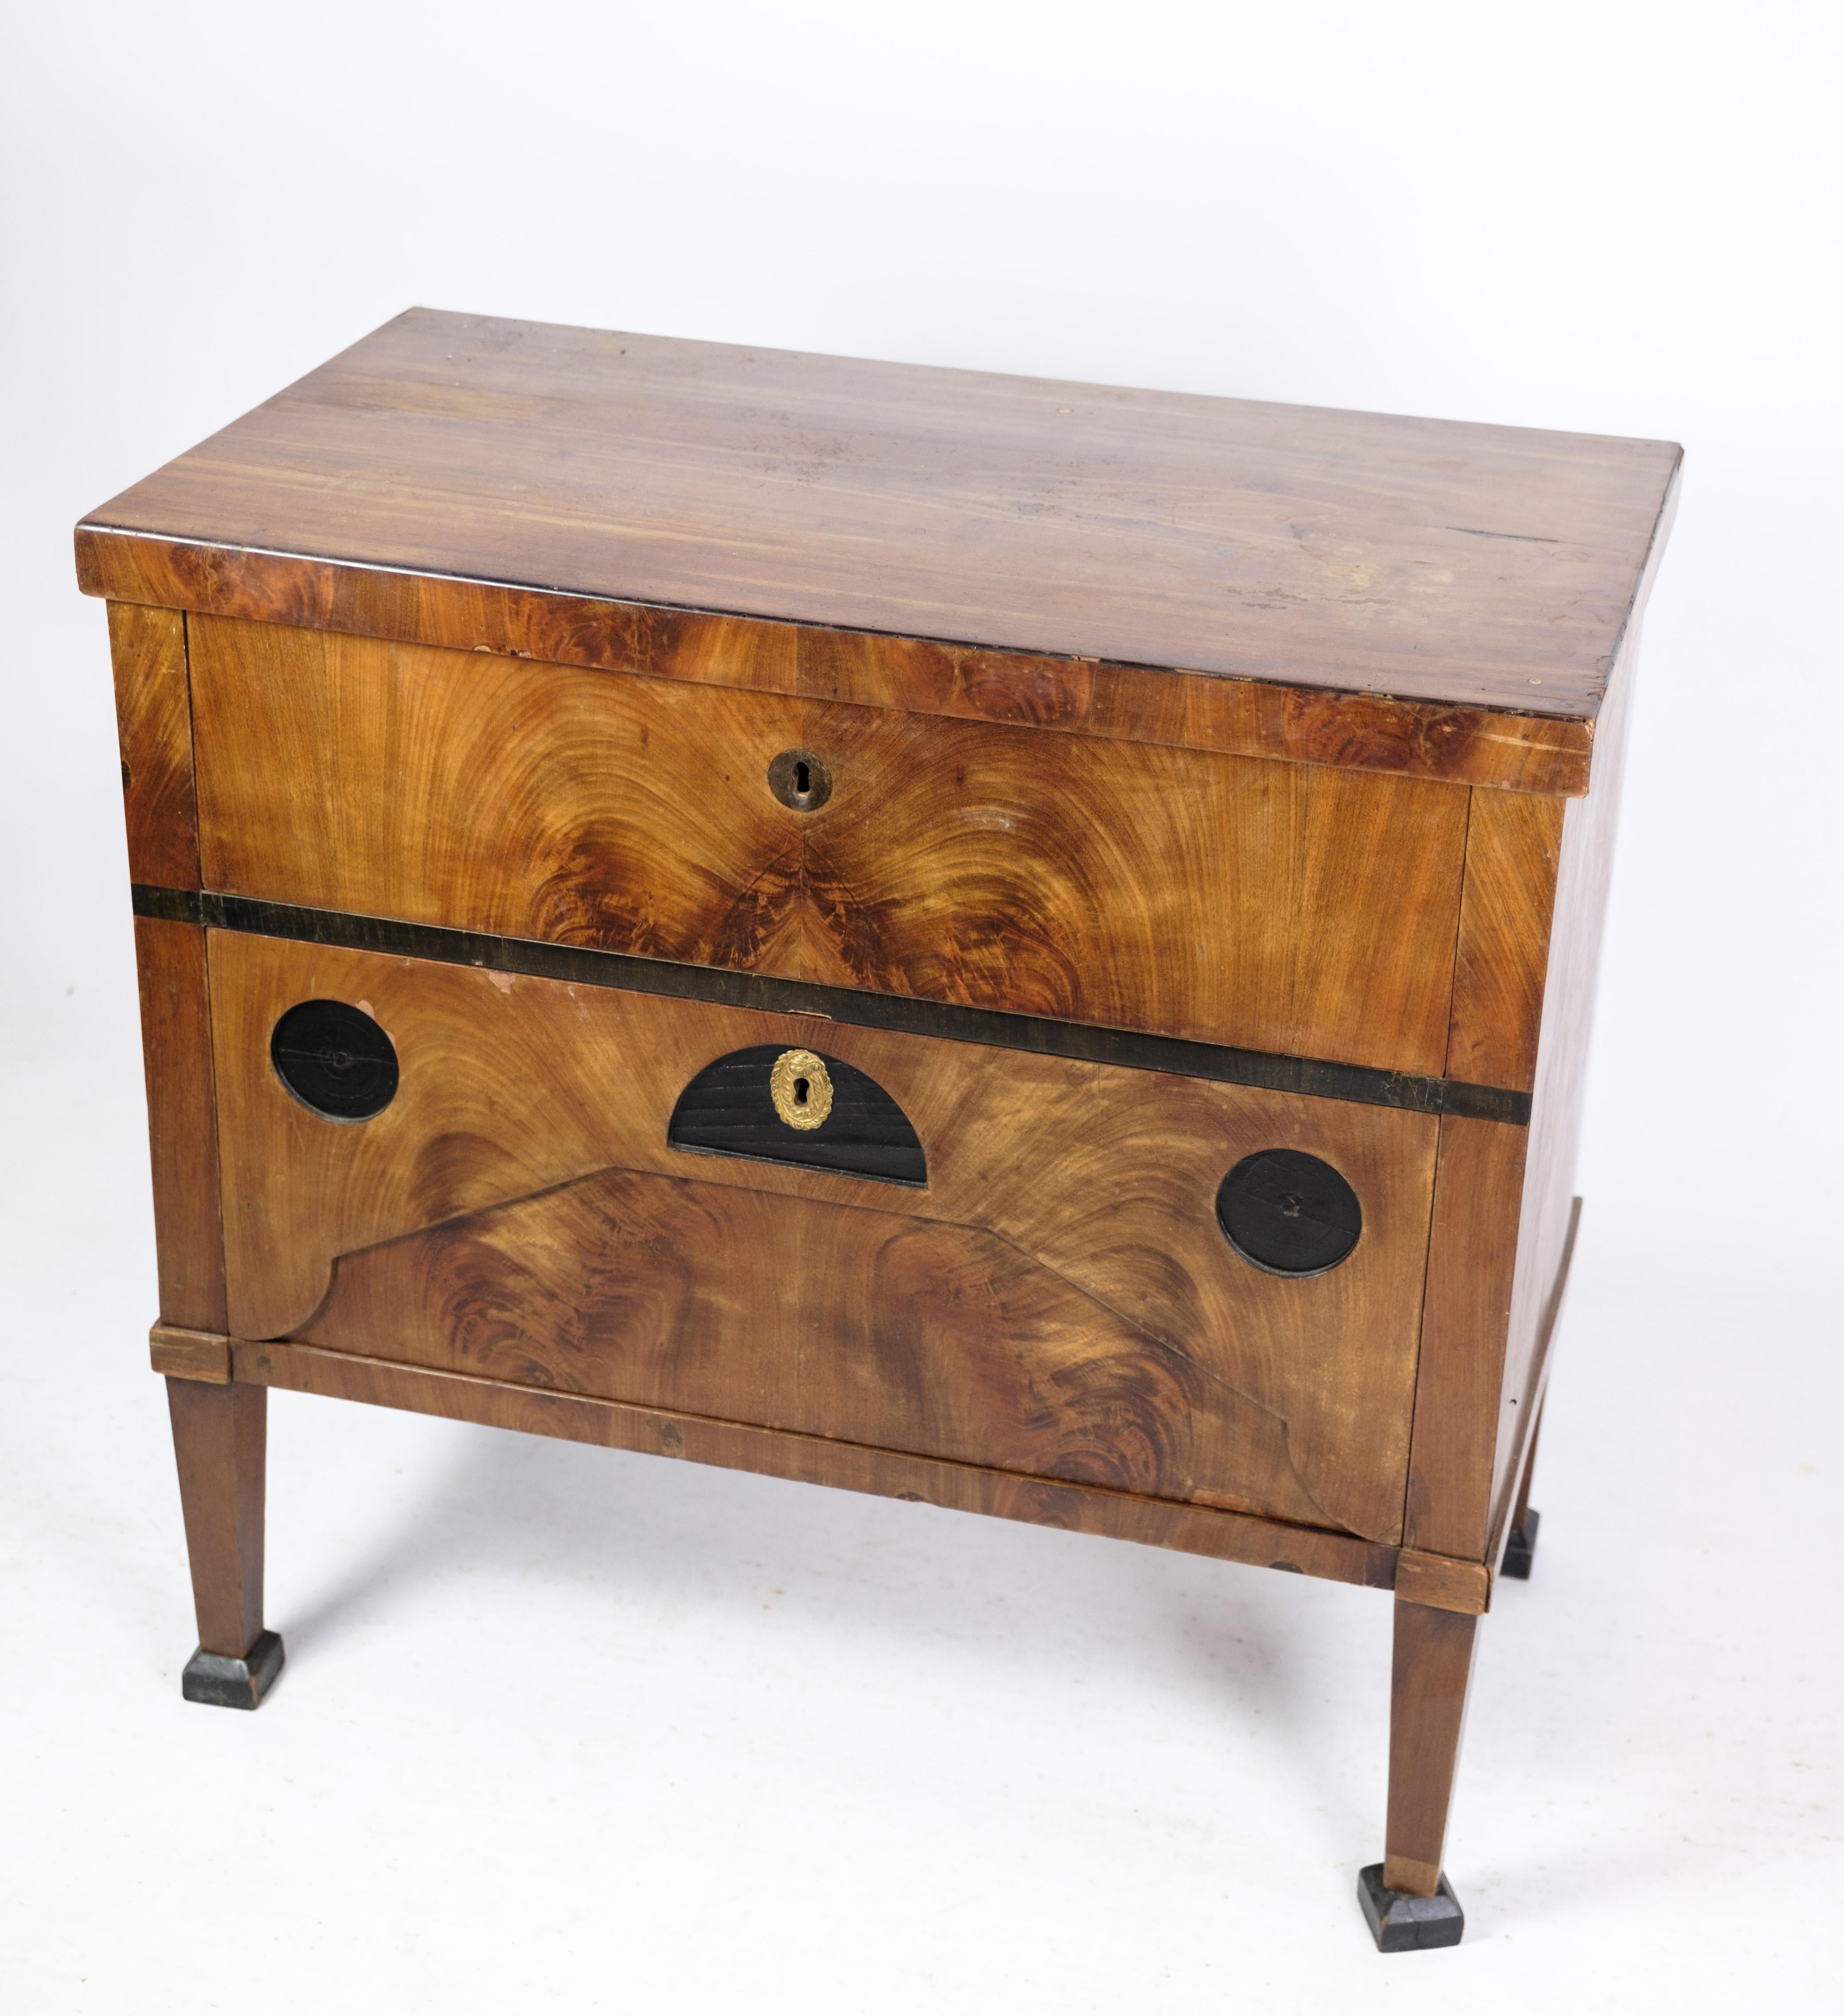 Small mahogany chest of drawers with marquetry from northern Germany from around the year 1810s
Dimensions in cm: H: 77 W: 80 D: 44
This product will be inspected thoroughly at our professional workshop by our educated employees, who assure the